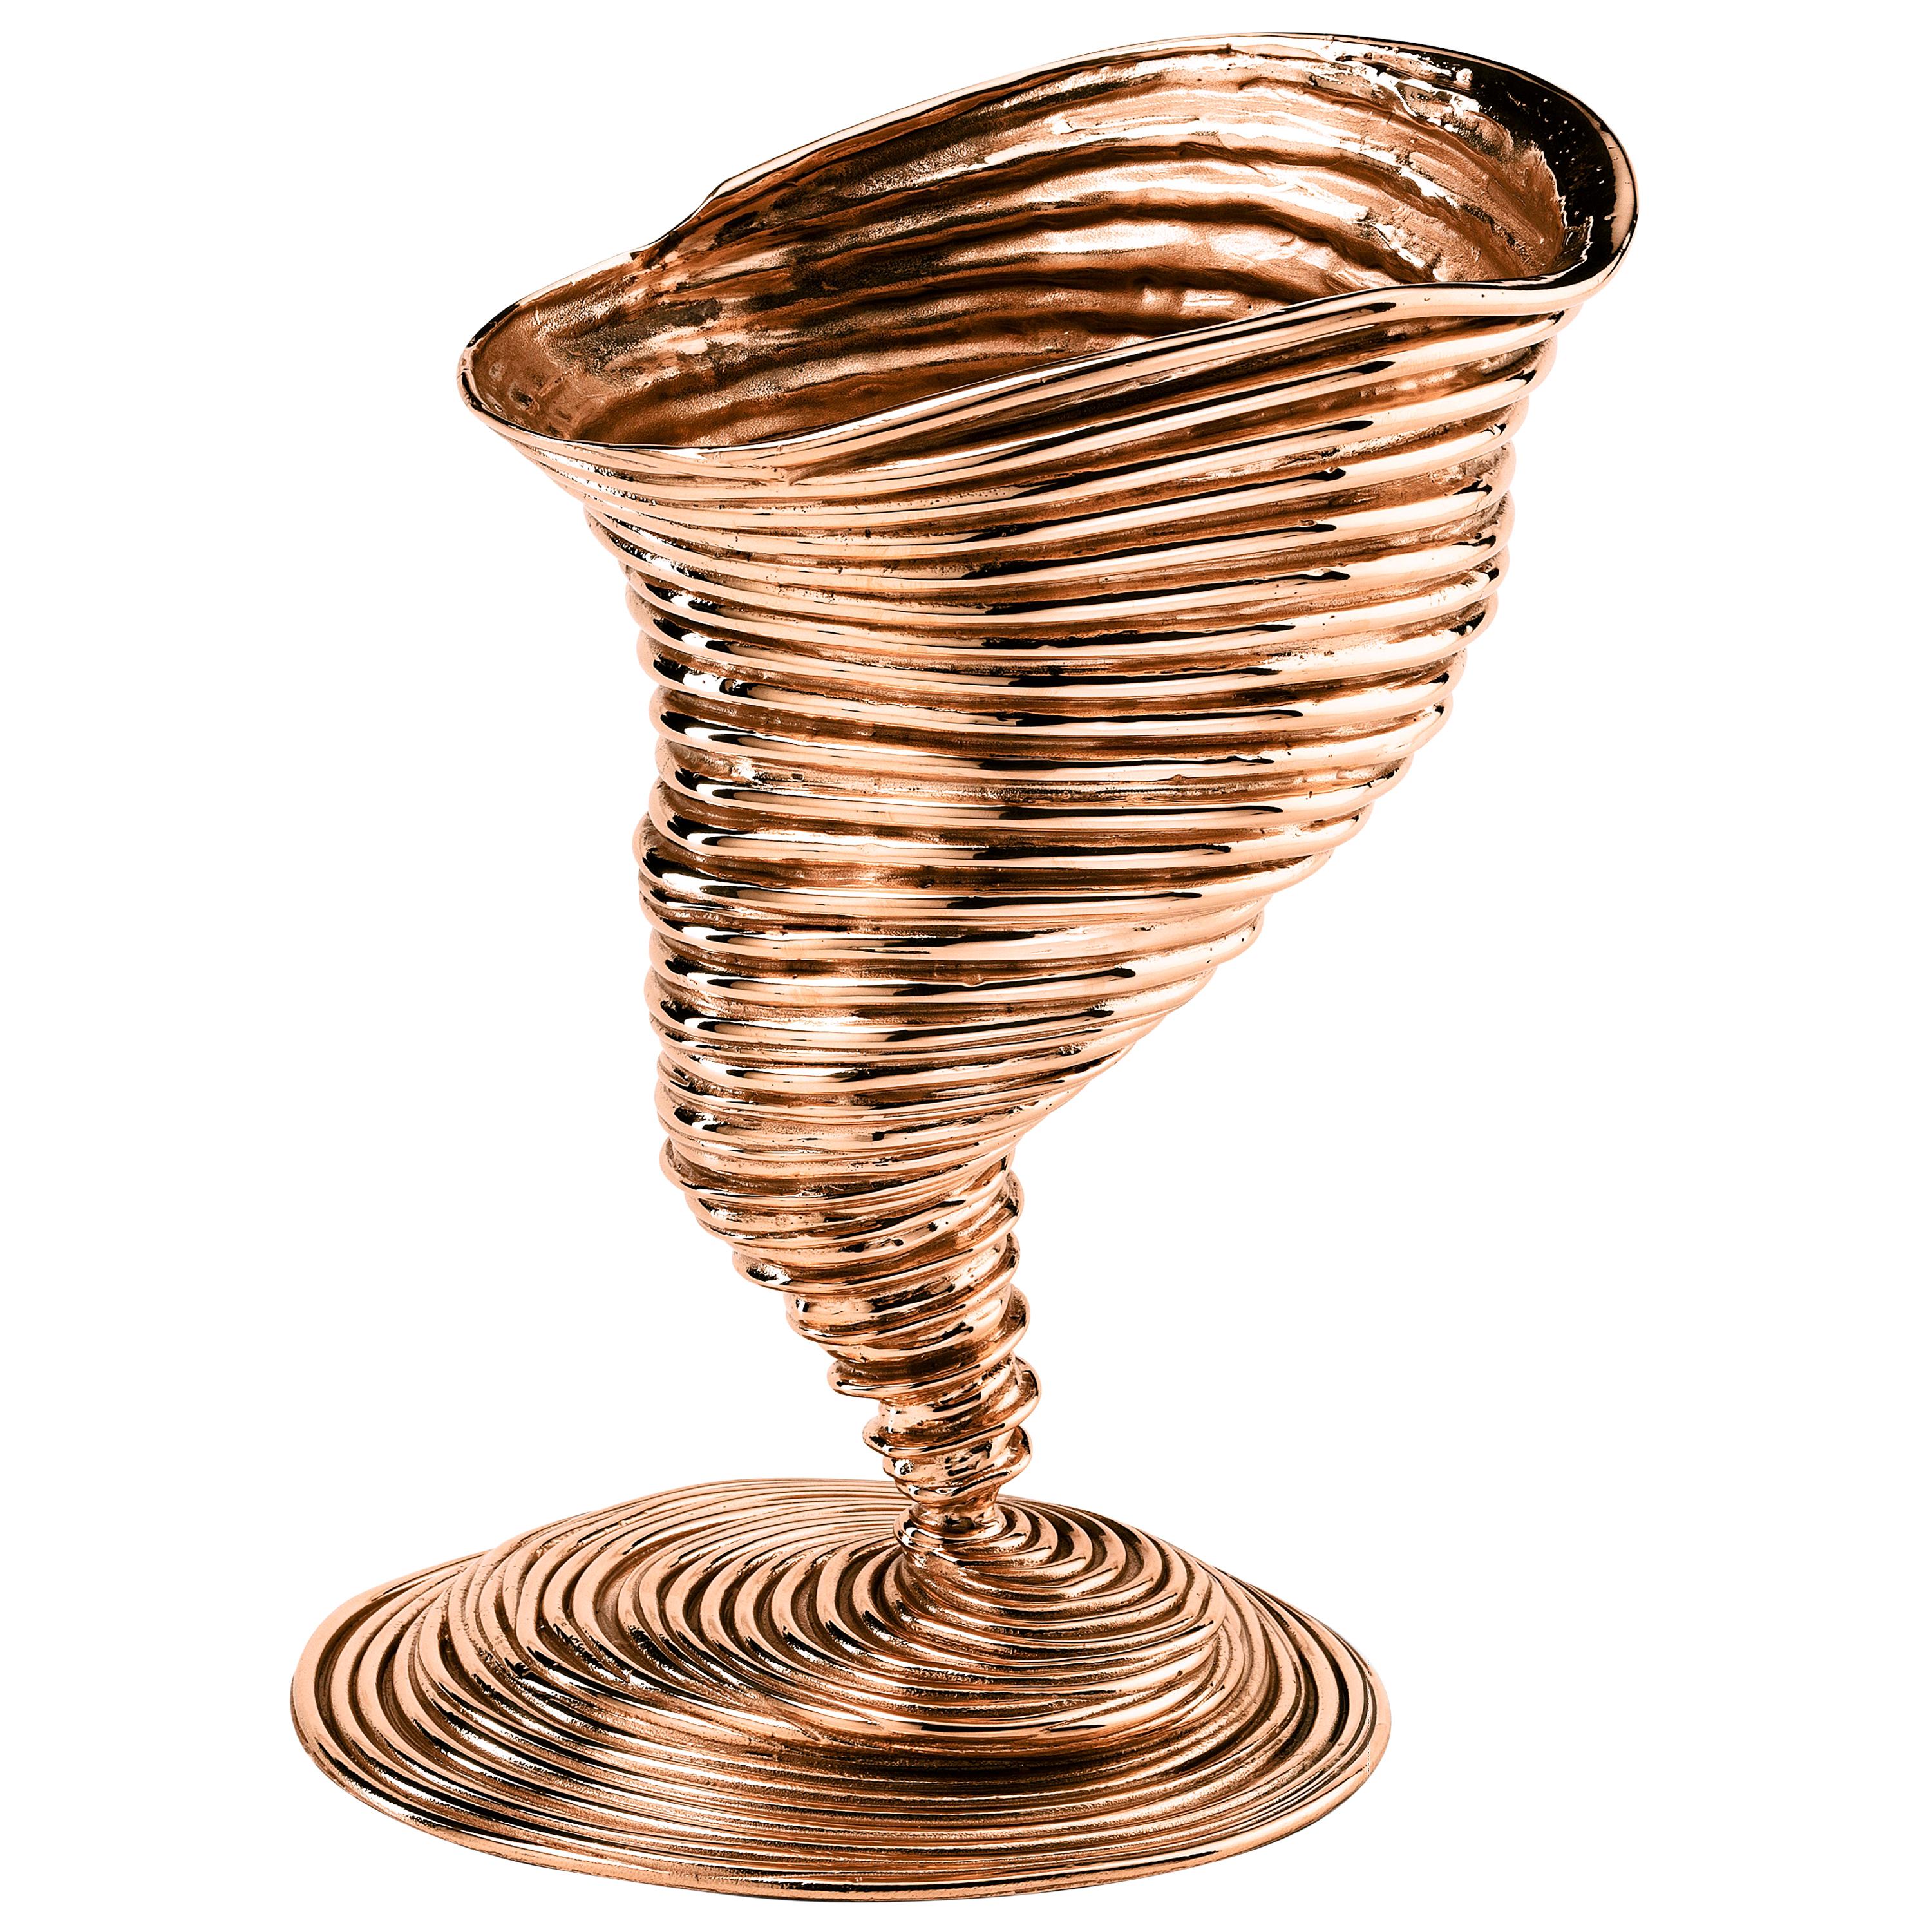 Tornado Spiral Sculptural Vase in Bronze by Campana Brothers For Sale